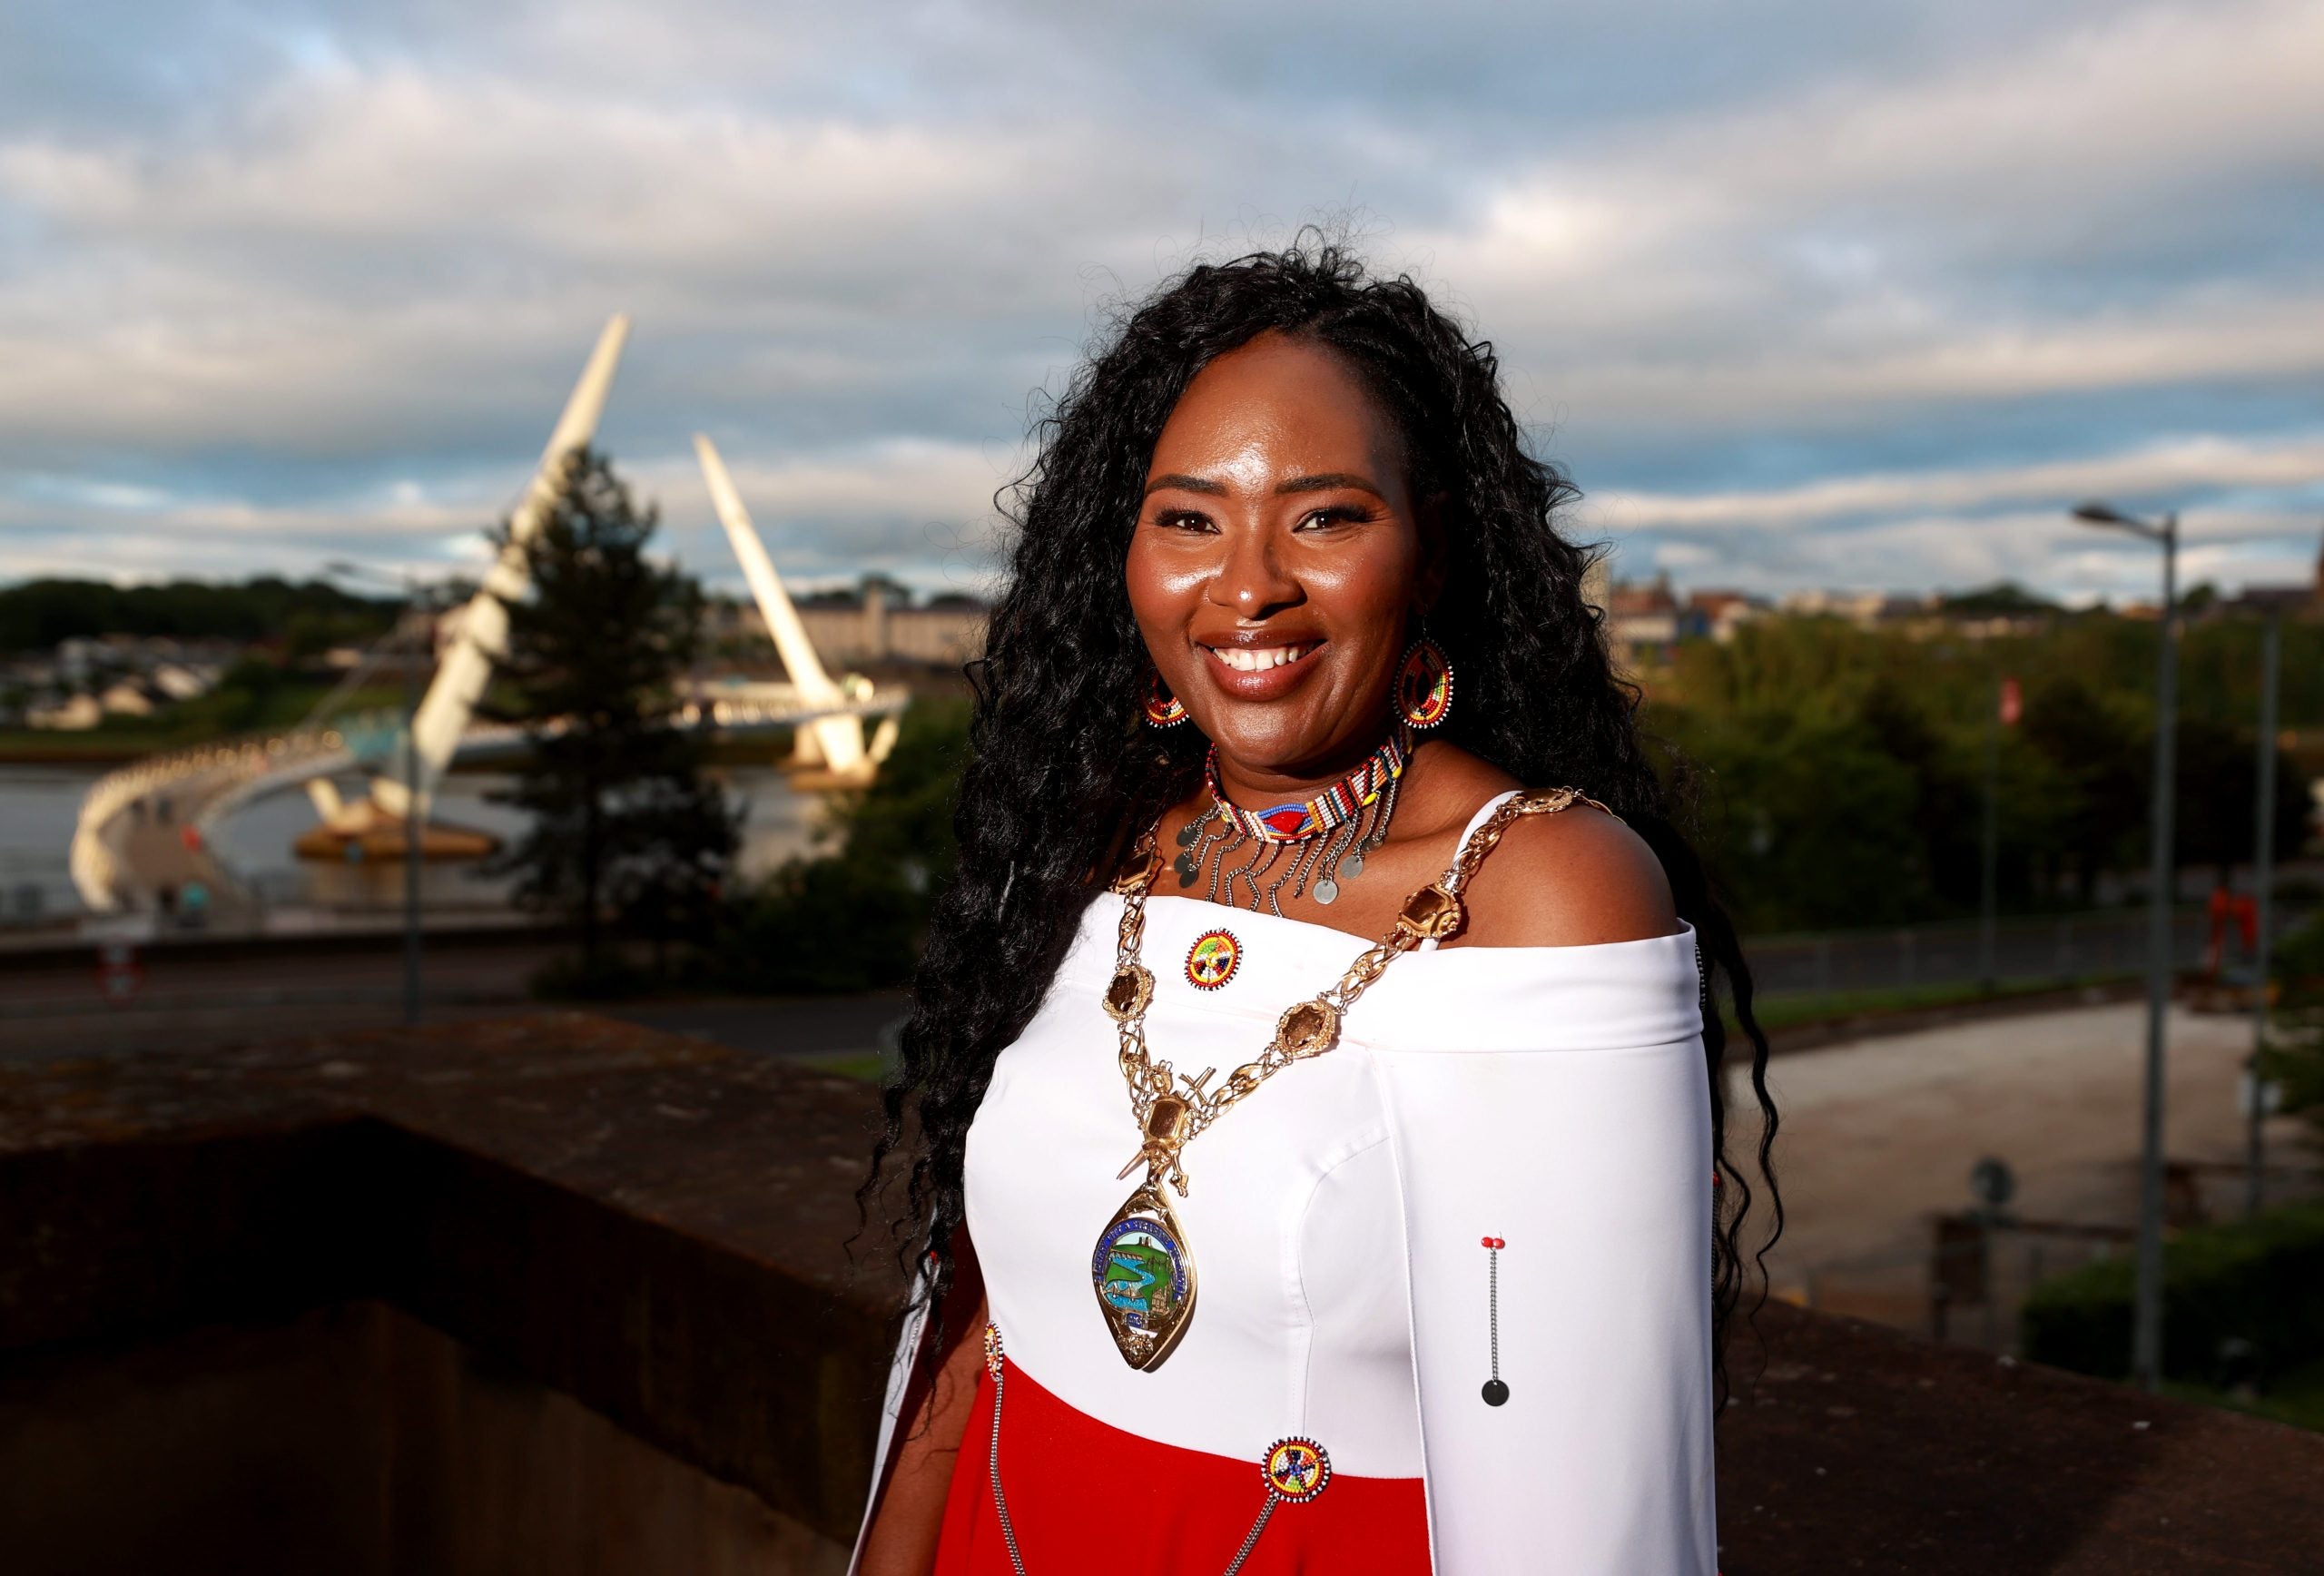  Meet Lilian Seenoi-Barr, A Former Kenyan Refugee Who Just Made History As The First Black Mayor Of Northern Ireland 